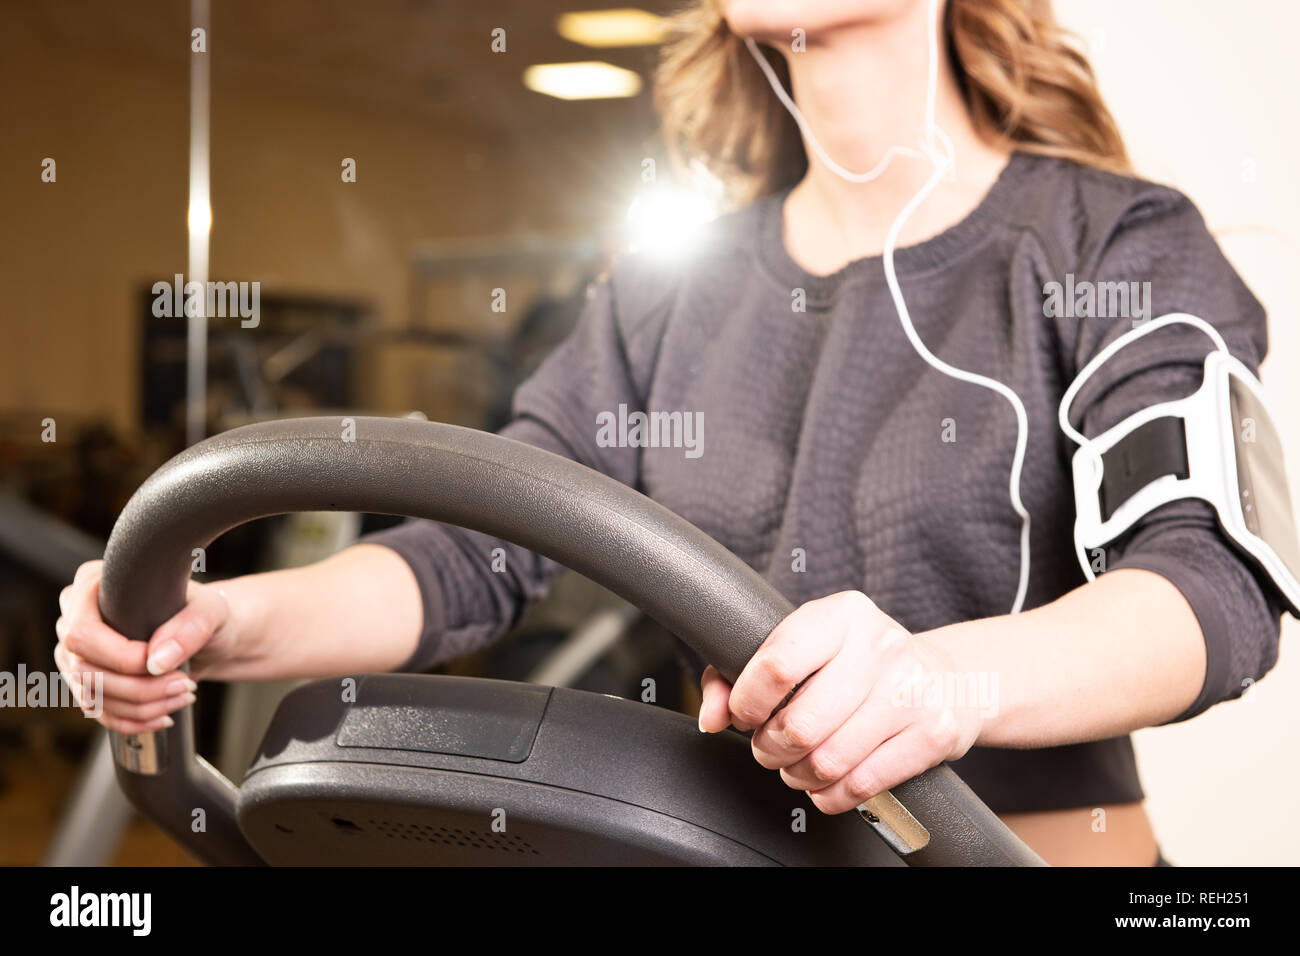 Fitness young girl on a stationary bike in a gym Stock Photo